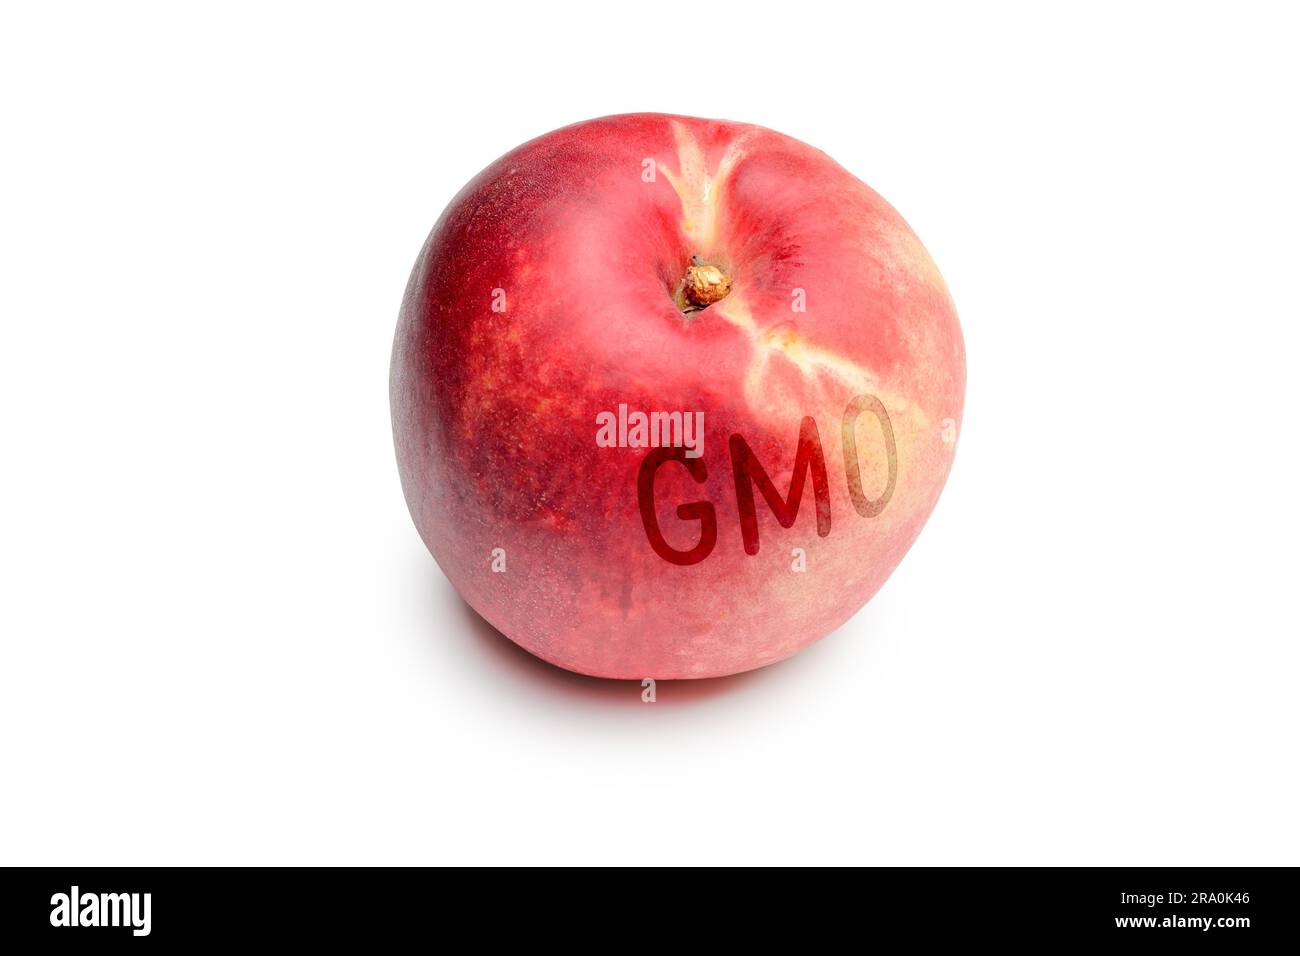 A nectarine contaminated by the use of GMO technology Stock Photo